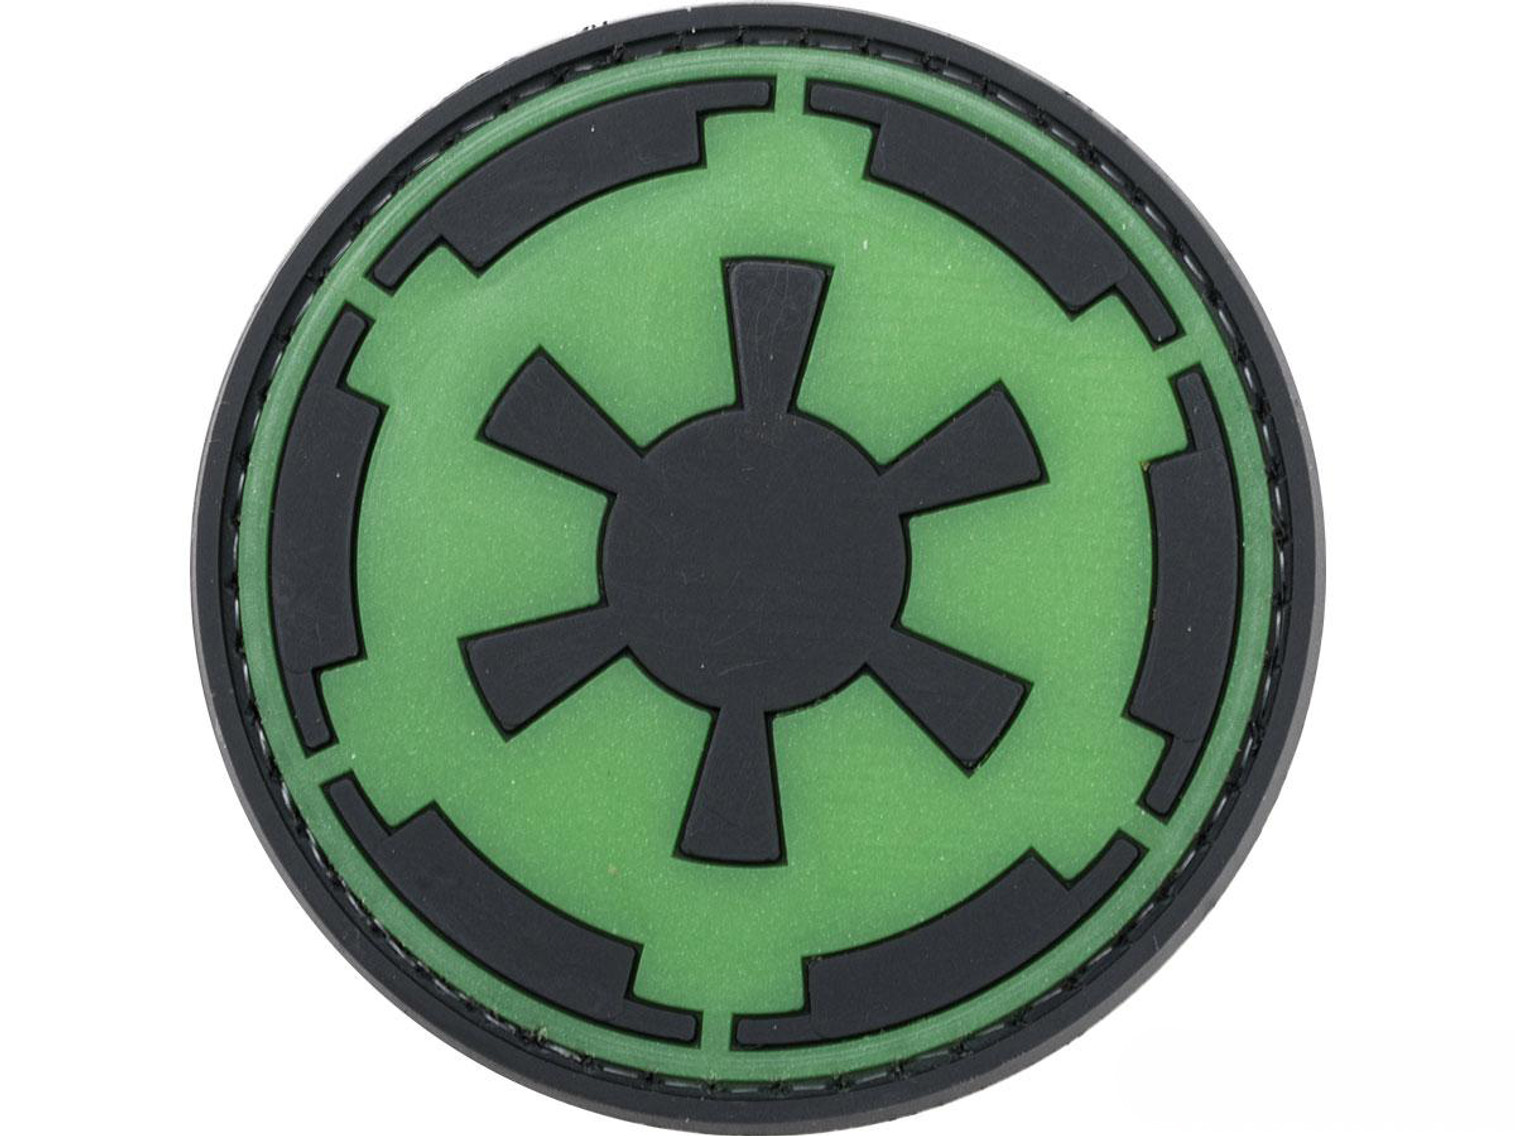 PVC Morale IFF Hook & Loop "Cosmic Dominion" Patch (Color: Green)